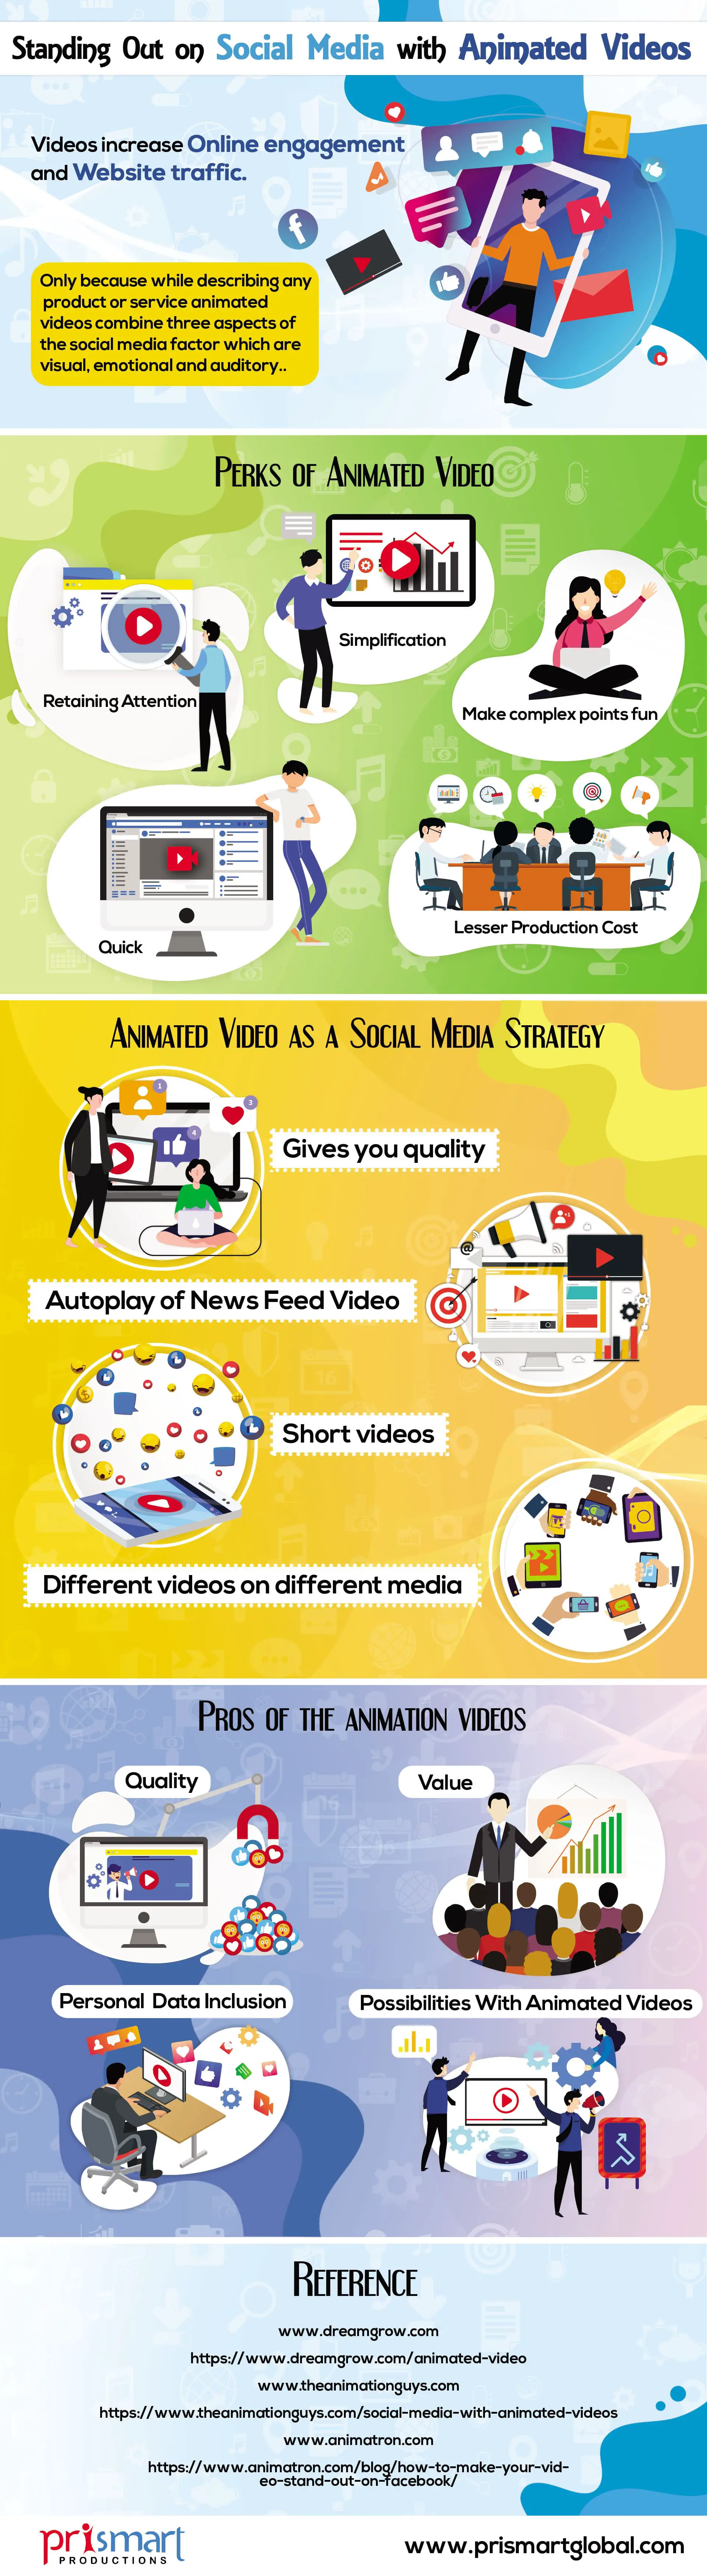 standing-out-on-social-media-with-animated-videos-prismart-infographic.jpg